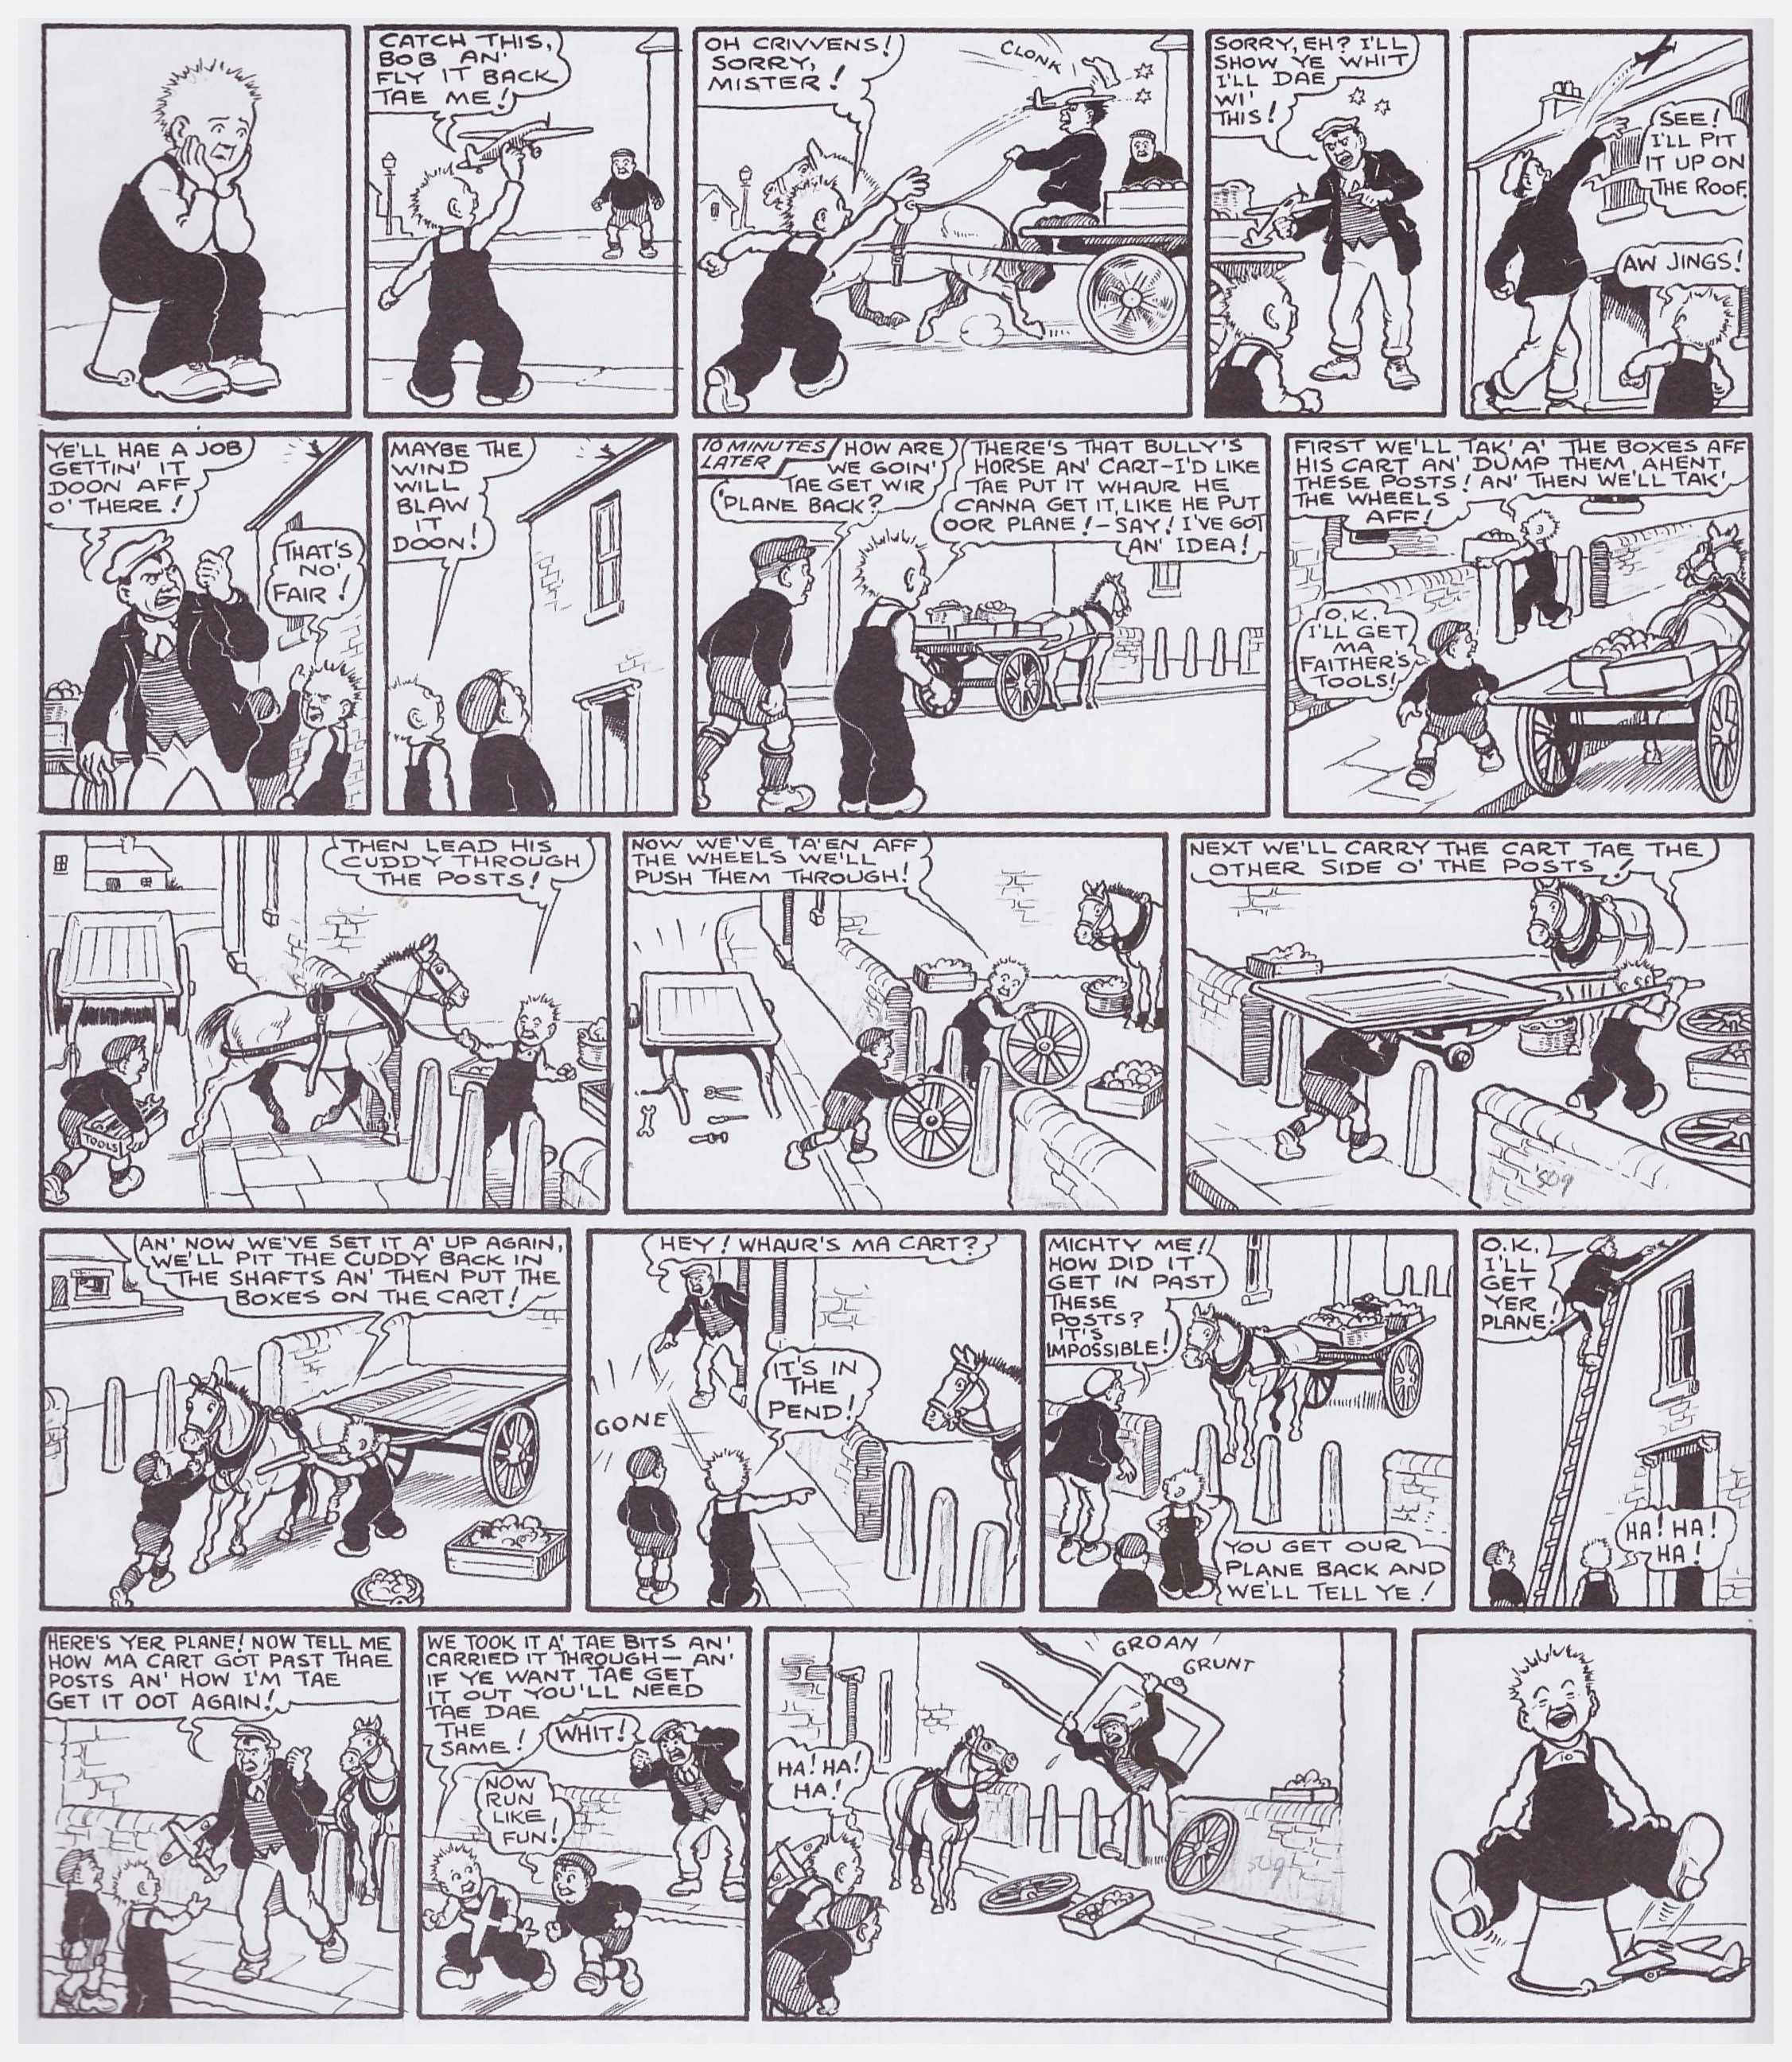 Broons and Oor Wullie The Roaring Forties review